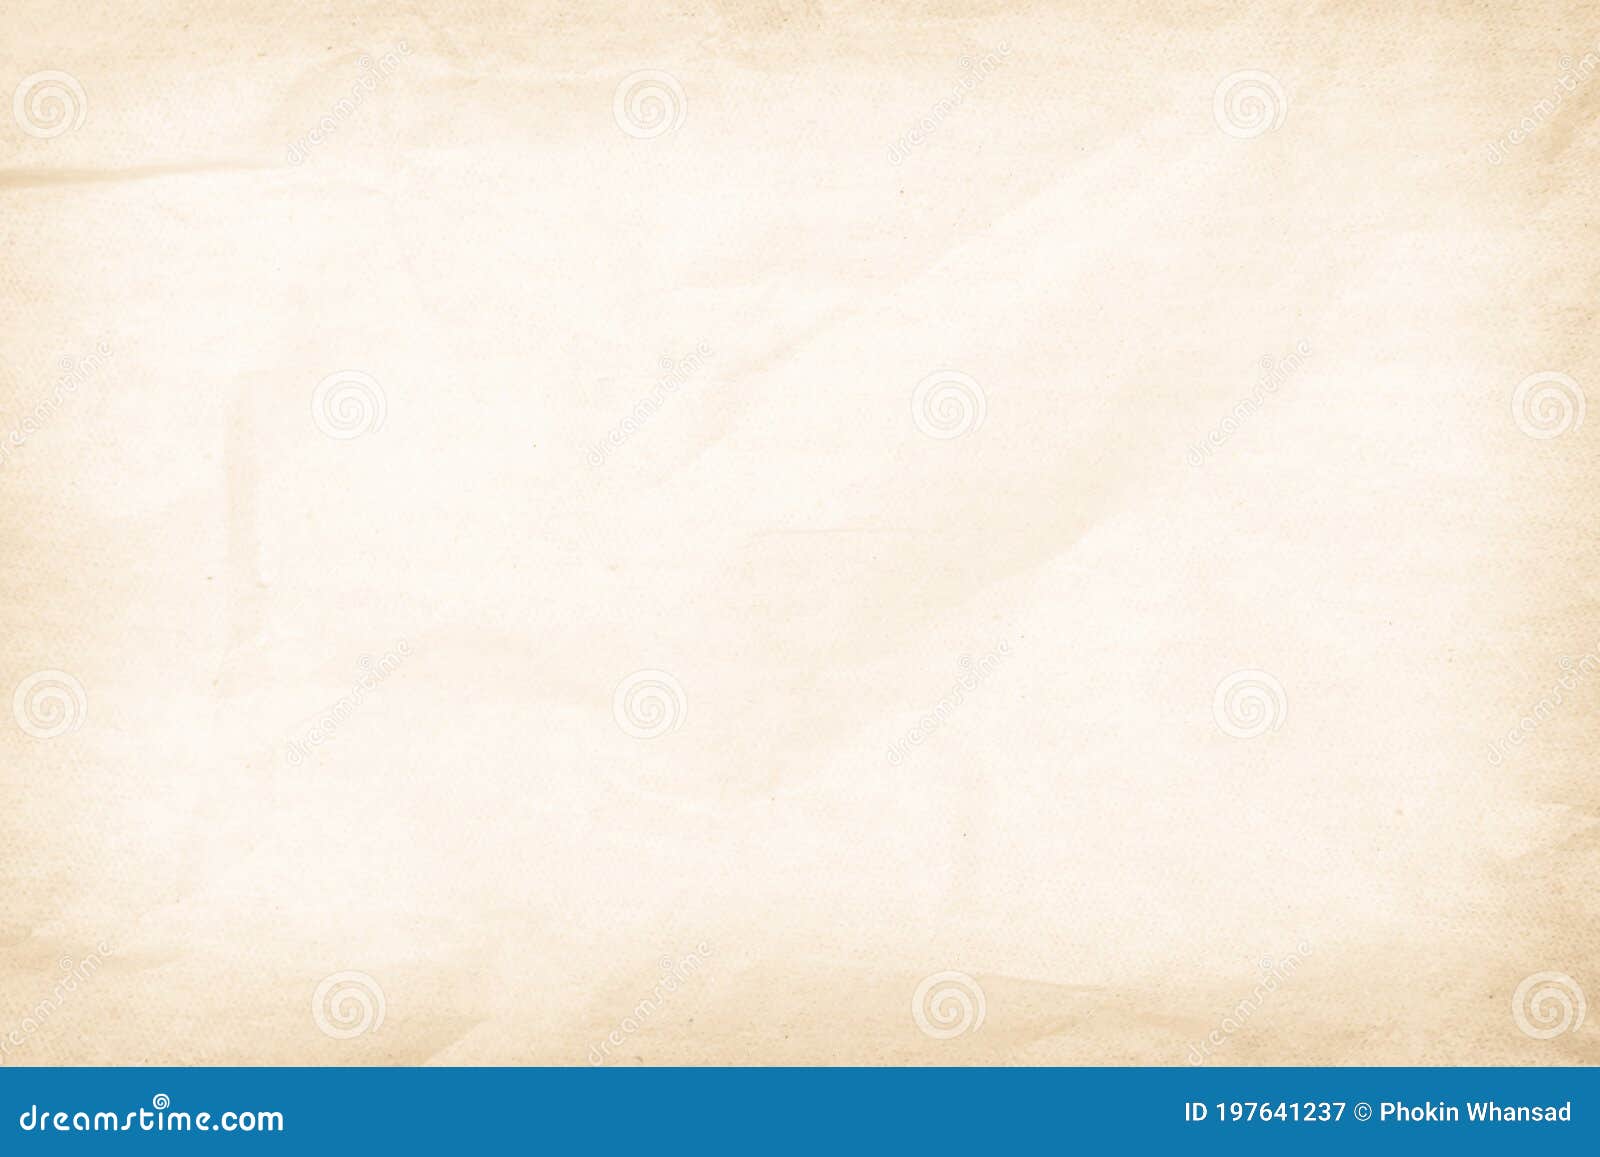 Parchment paper background texture Stock Illustration by ©clearviewstock  #9361048